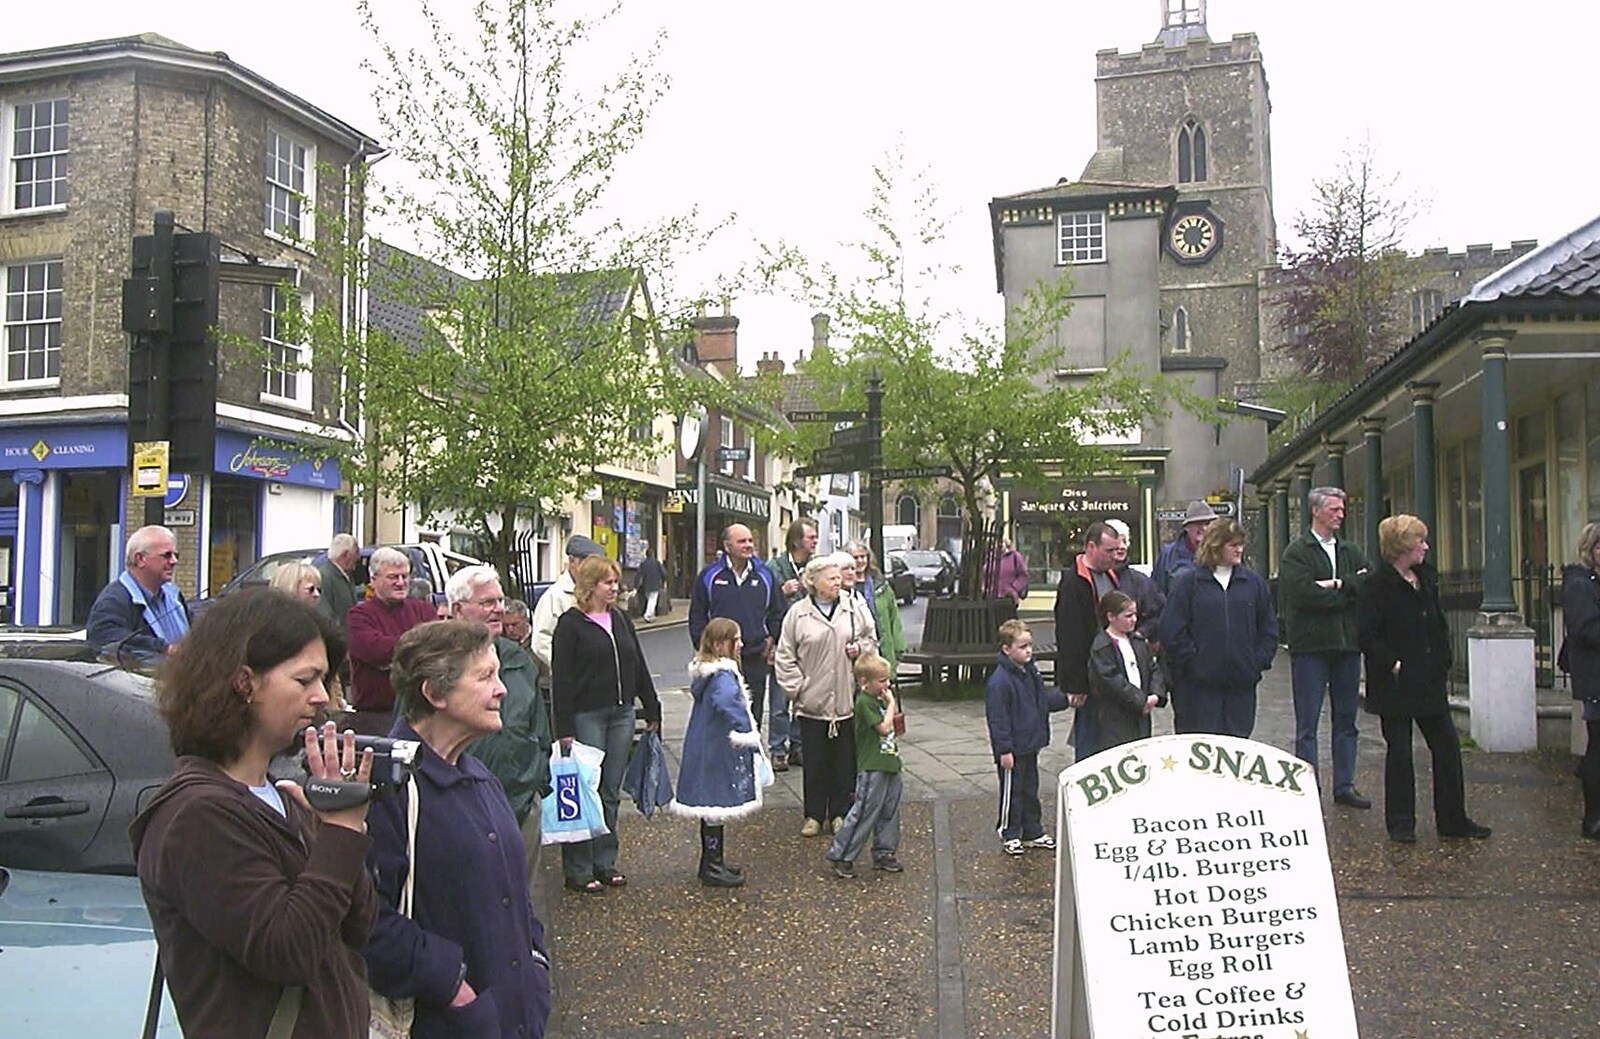 People watch the dancing from Badminton Sprogs and The Skelton Festival, Diss, Norfolk - 1st May 2004